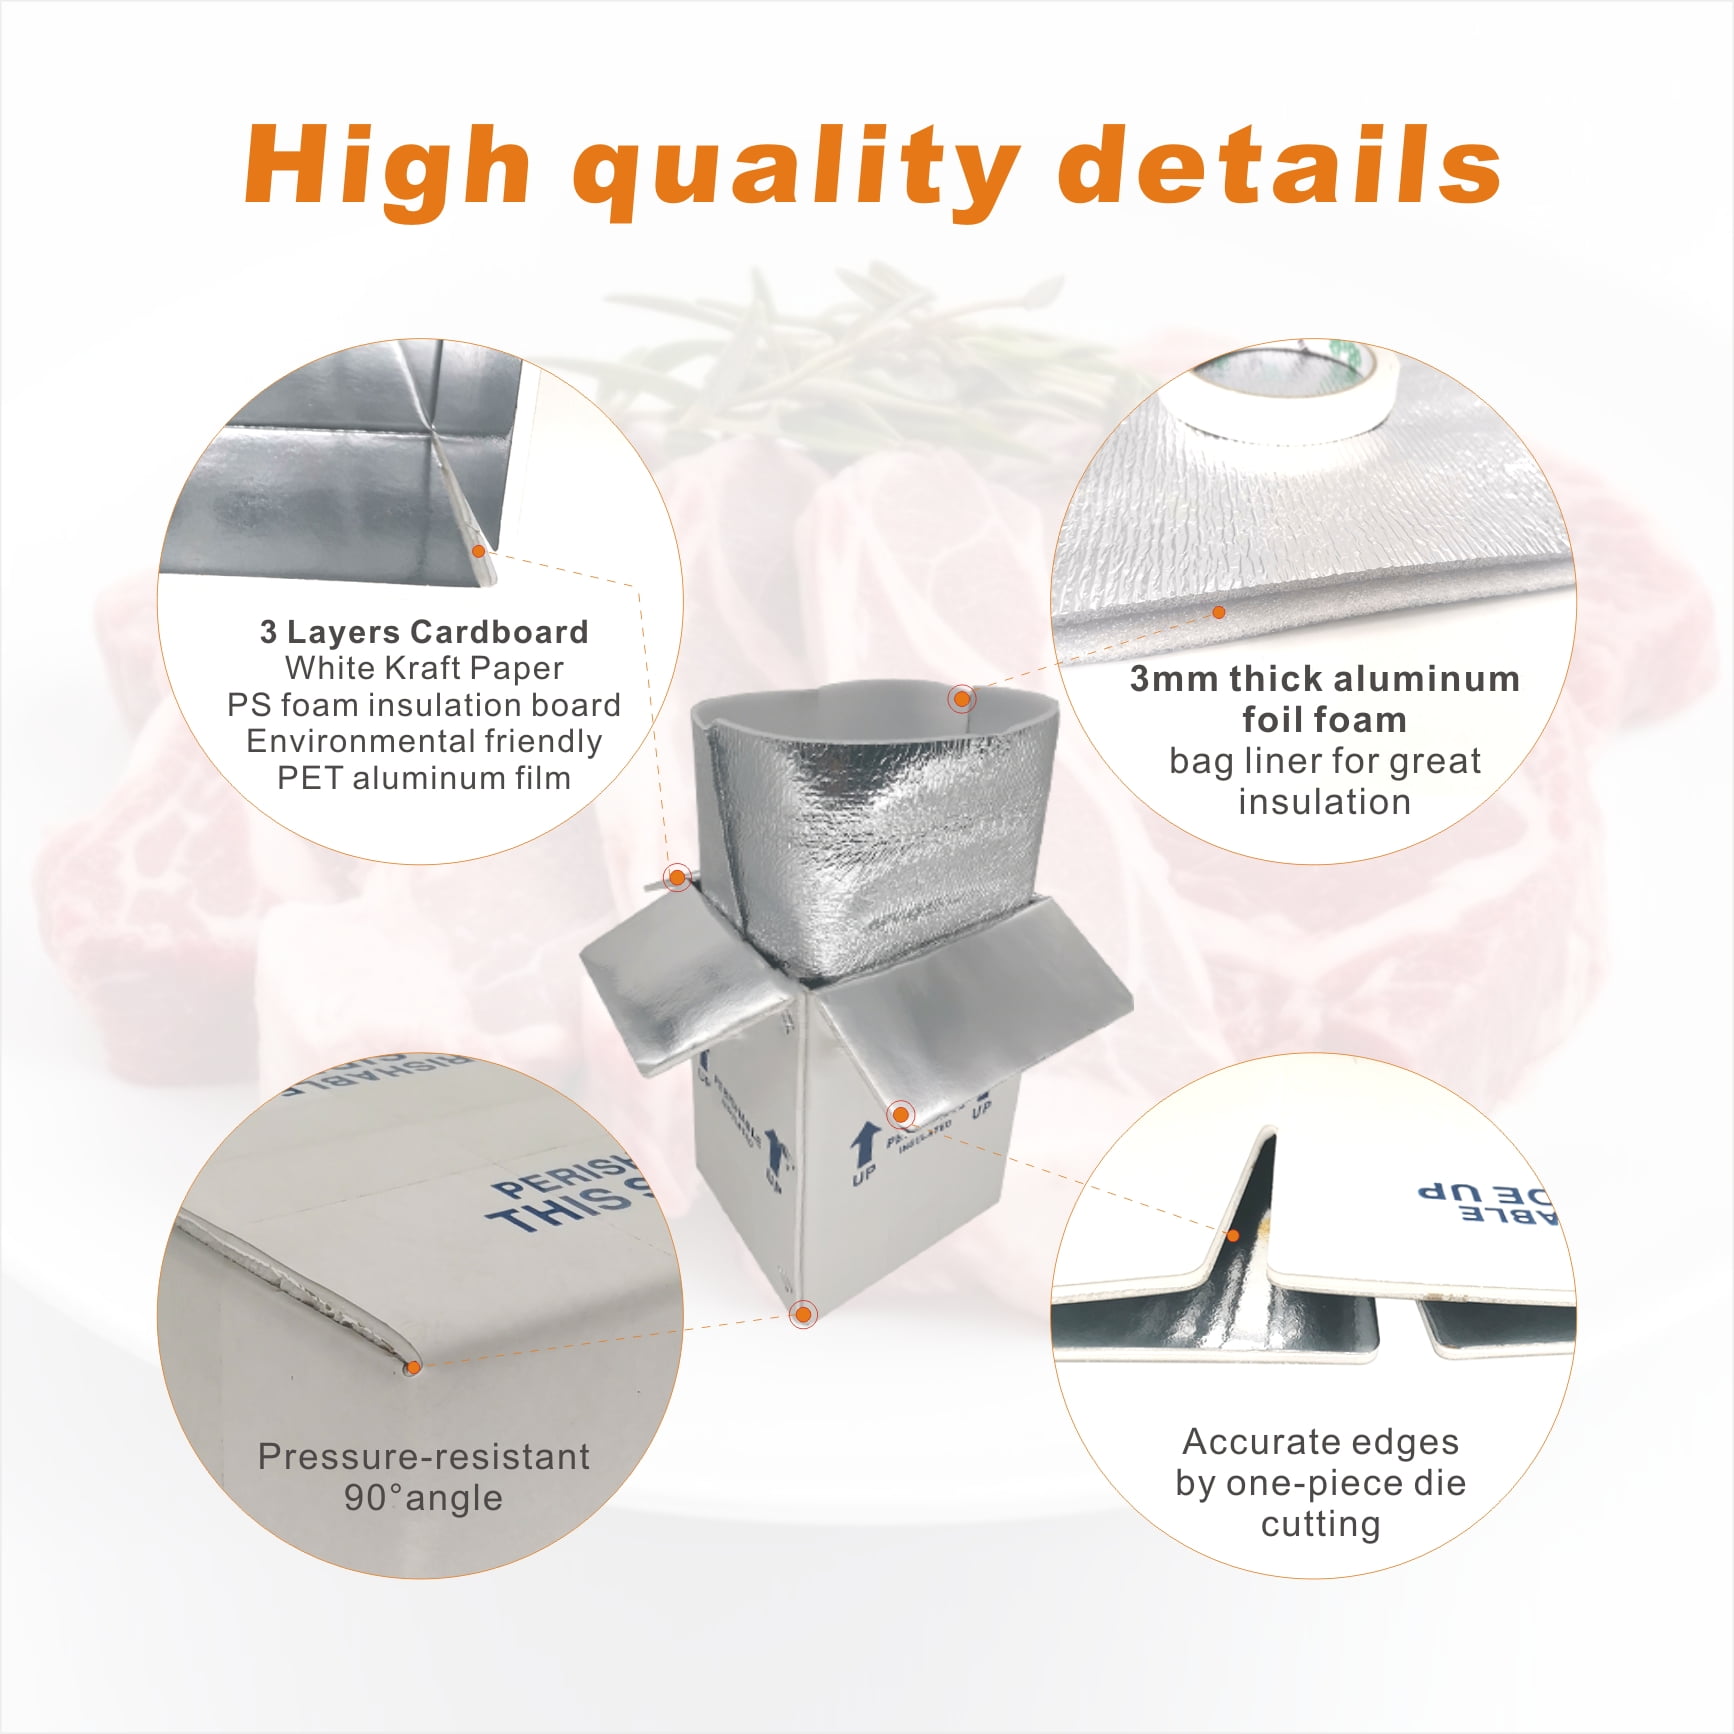  Thermo Chill Insulated Shipping Boxes with Aluminum Foil Liner,  Cold Shipping Boxes, Mailing Boxes Carton Box Food Delivery Box Small Styrofoam  Cooler Travel Packing Supplies Box (4 Packs,8x4x6) : Office Products